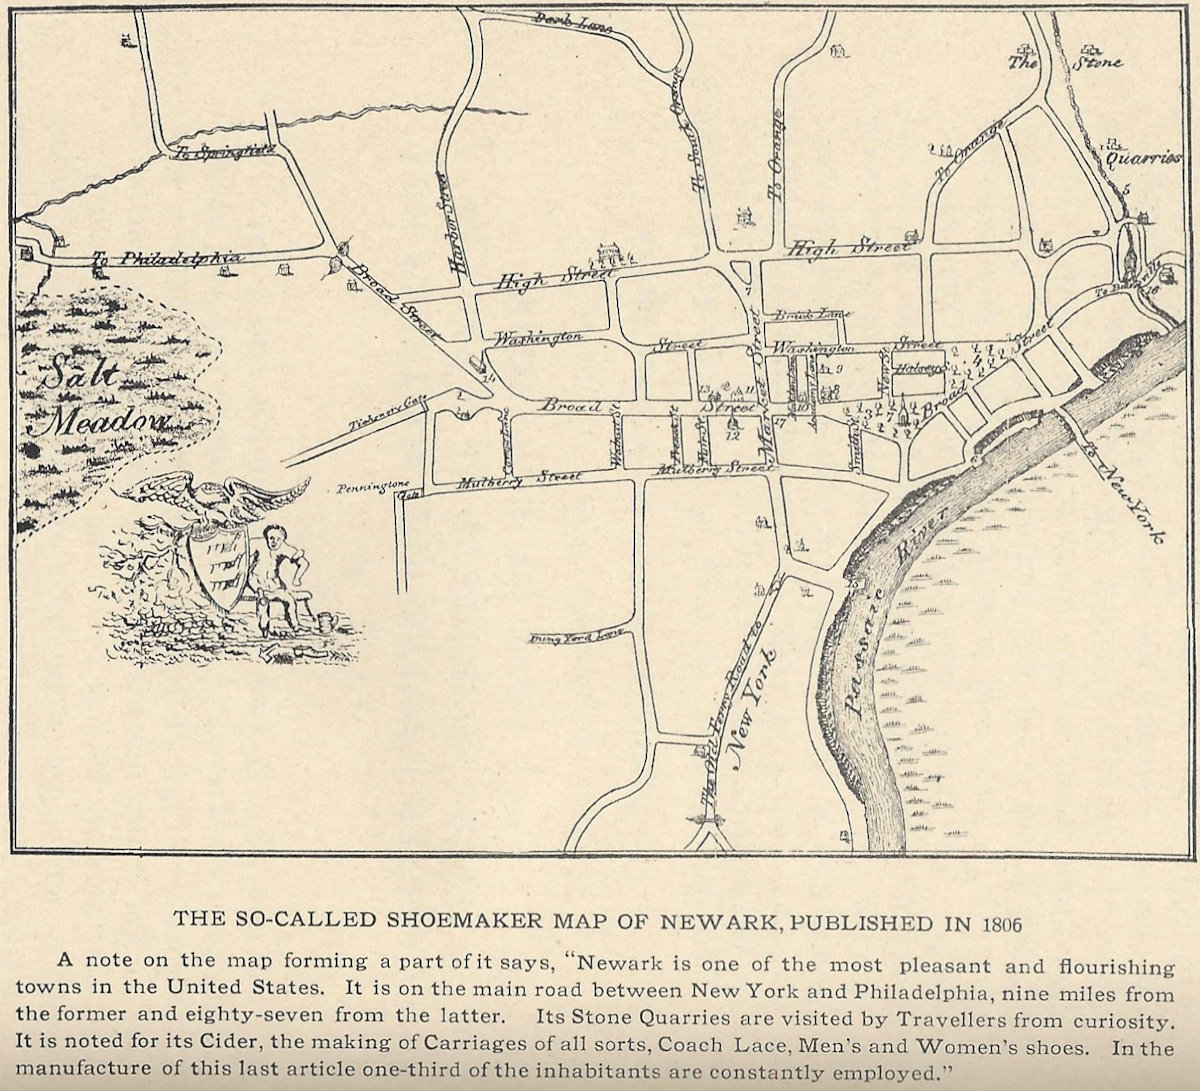 Shoemaker Map 1806
From "Newark in the Public Schools"
